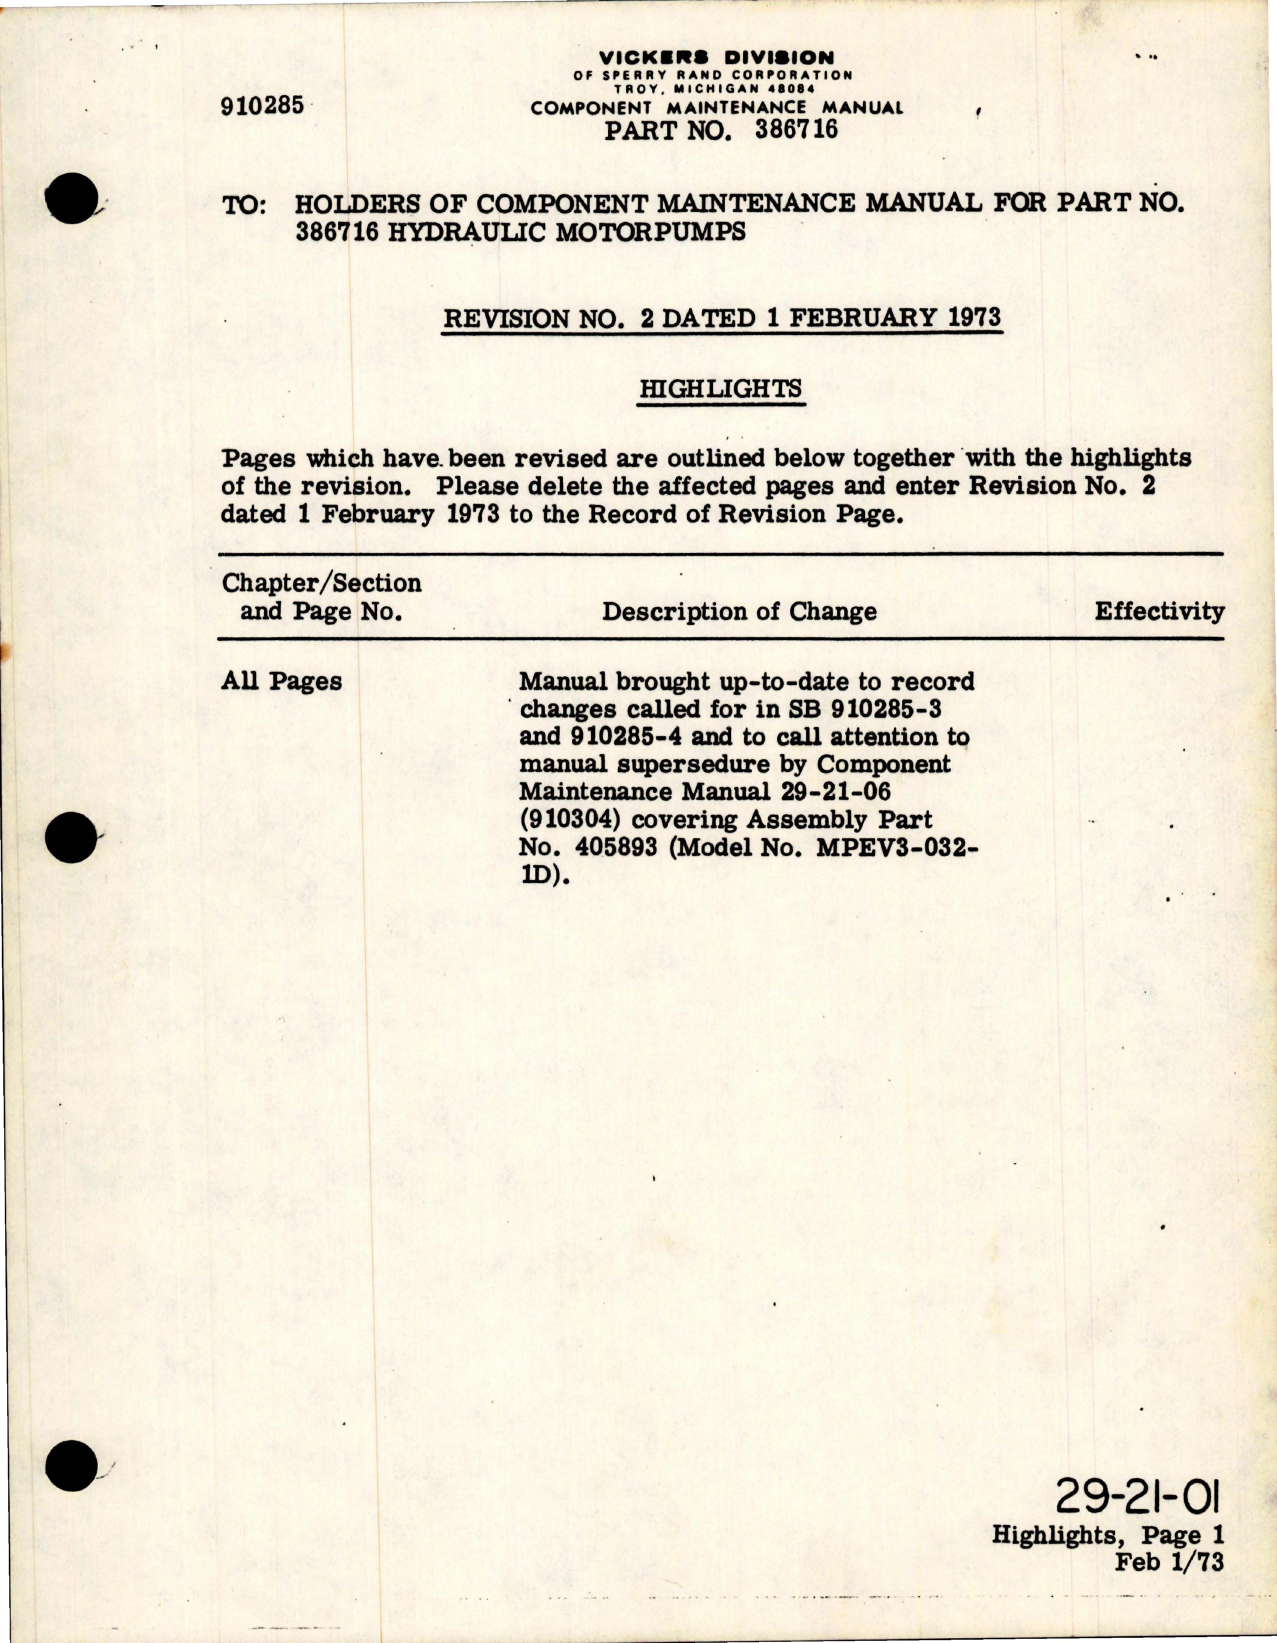 Sample page 1 from AirCorps Library document: Component Maintenance Manual for Hydraulic Motorpumps - Part 386716 - Revision No. 2 